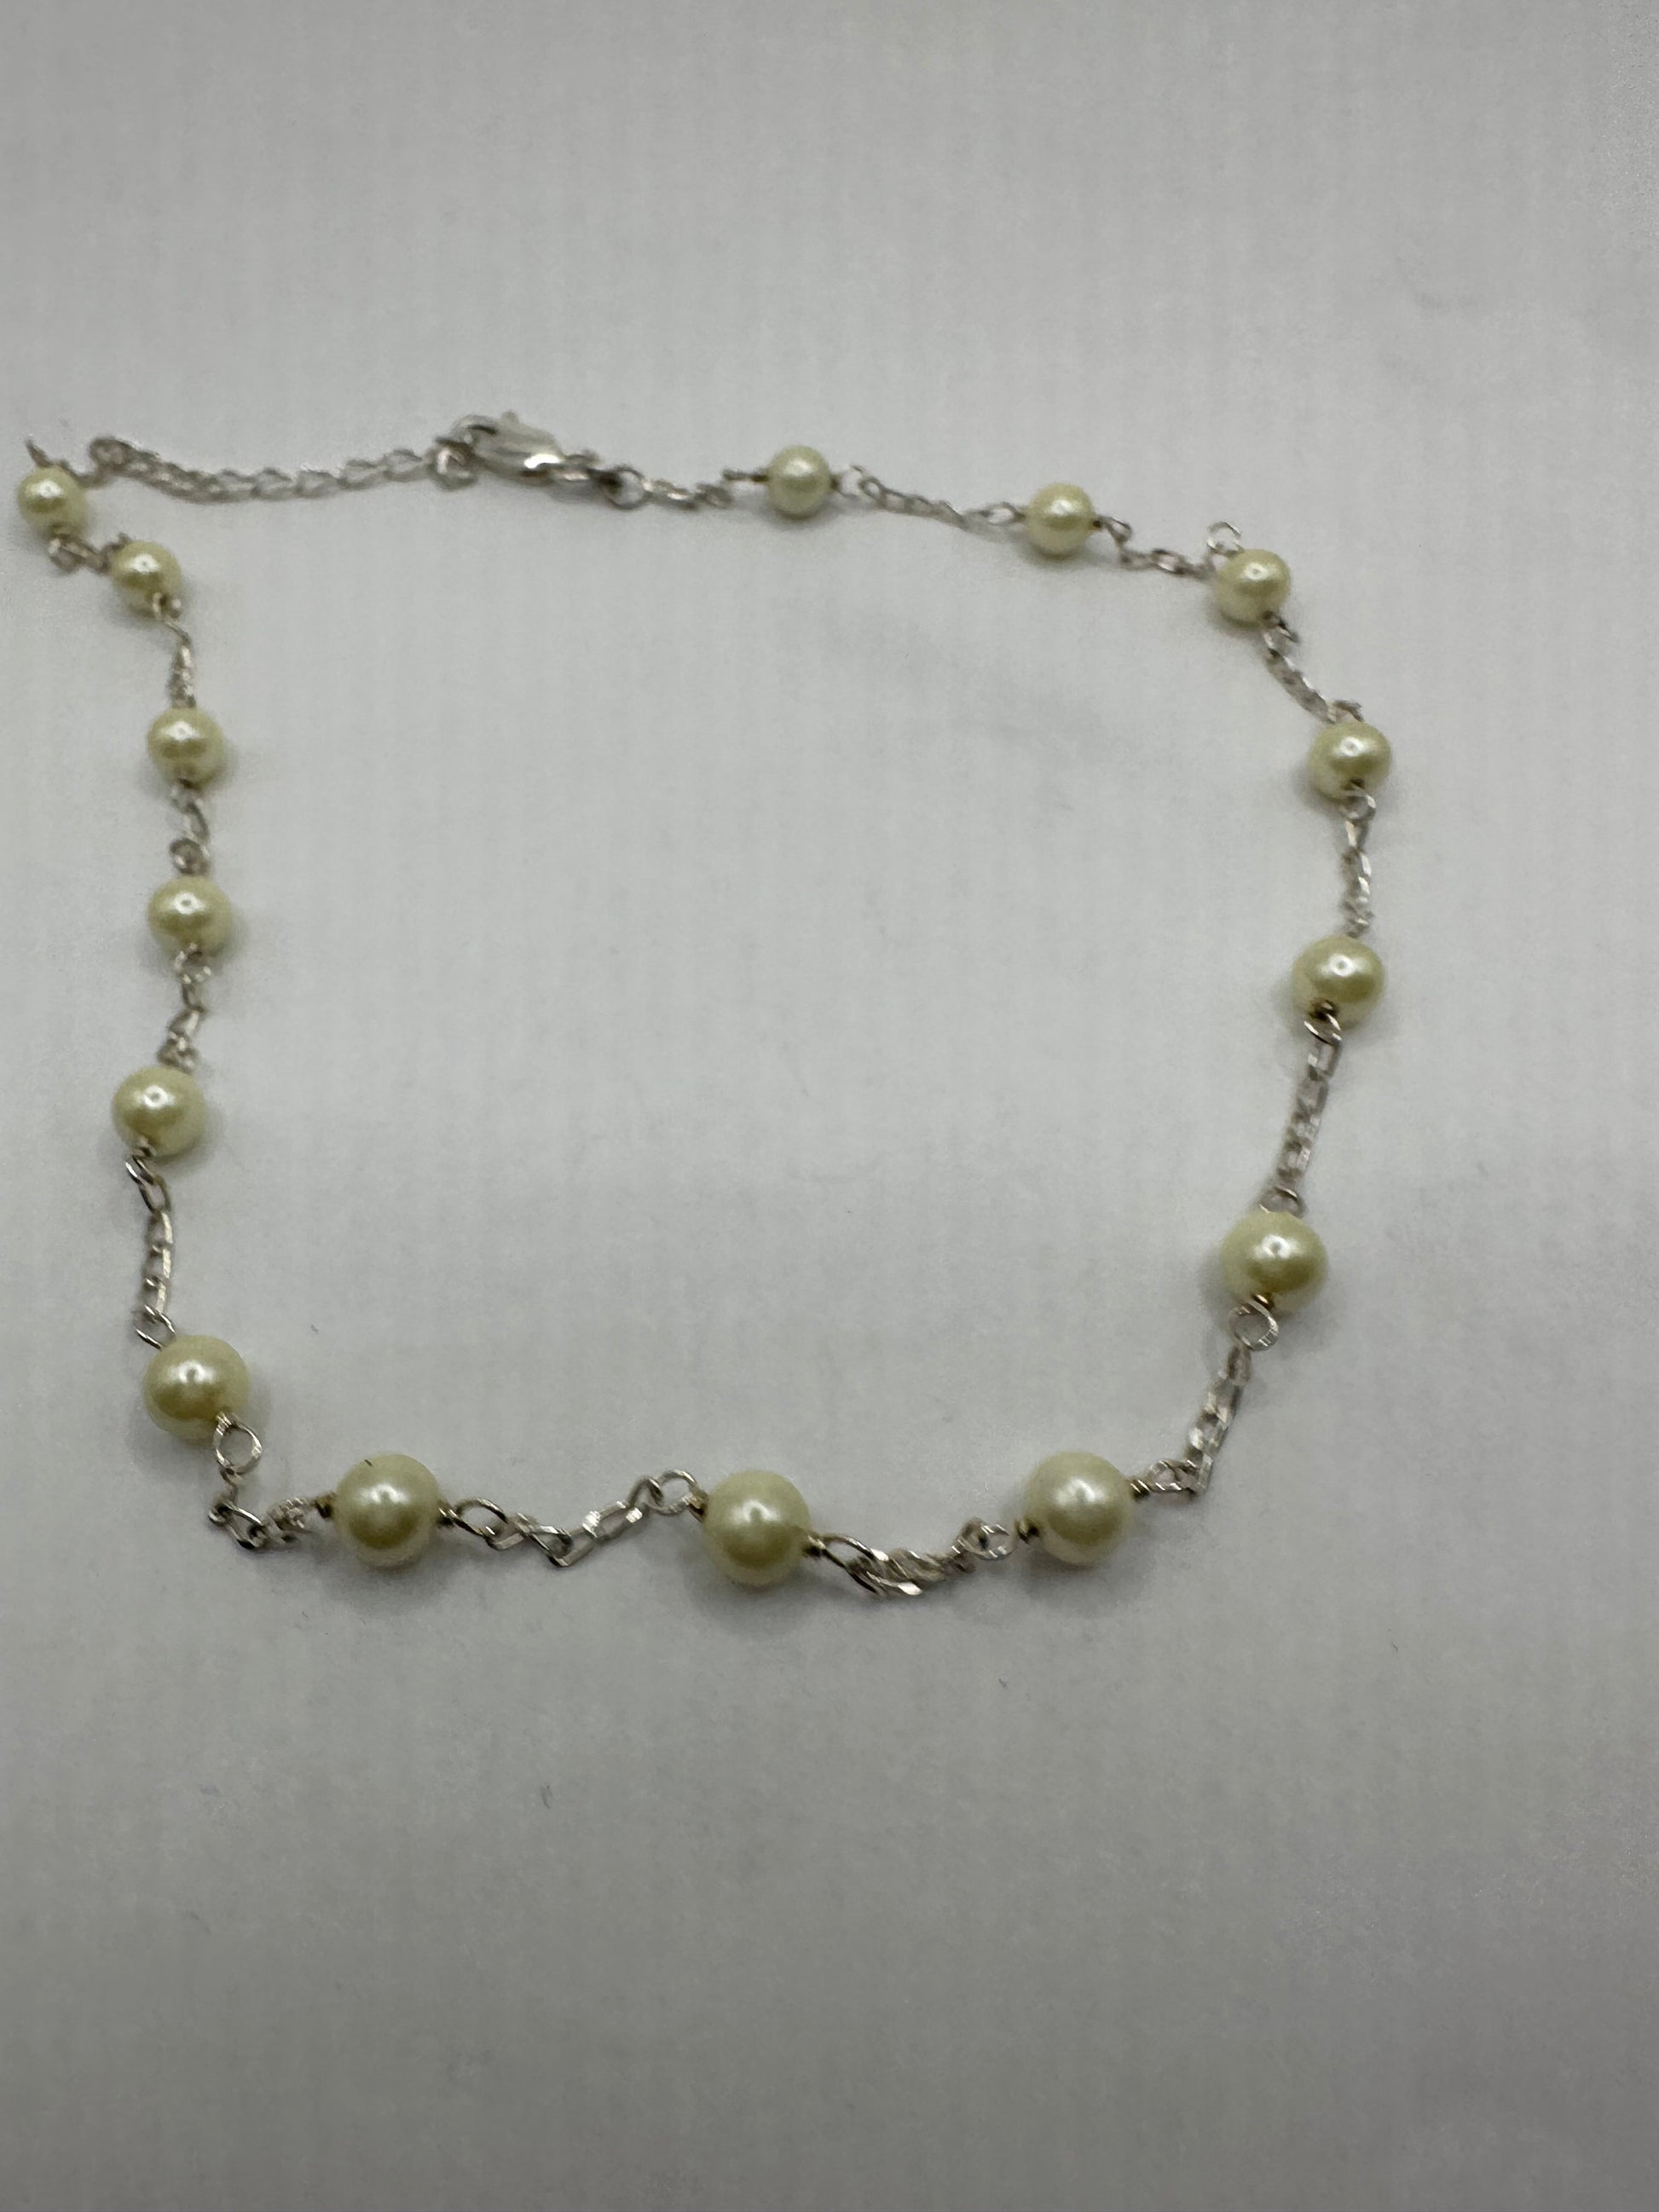 Vintage Choker 925 Sterling Silver Pearl Necklace